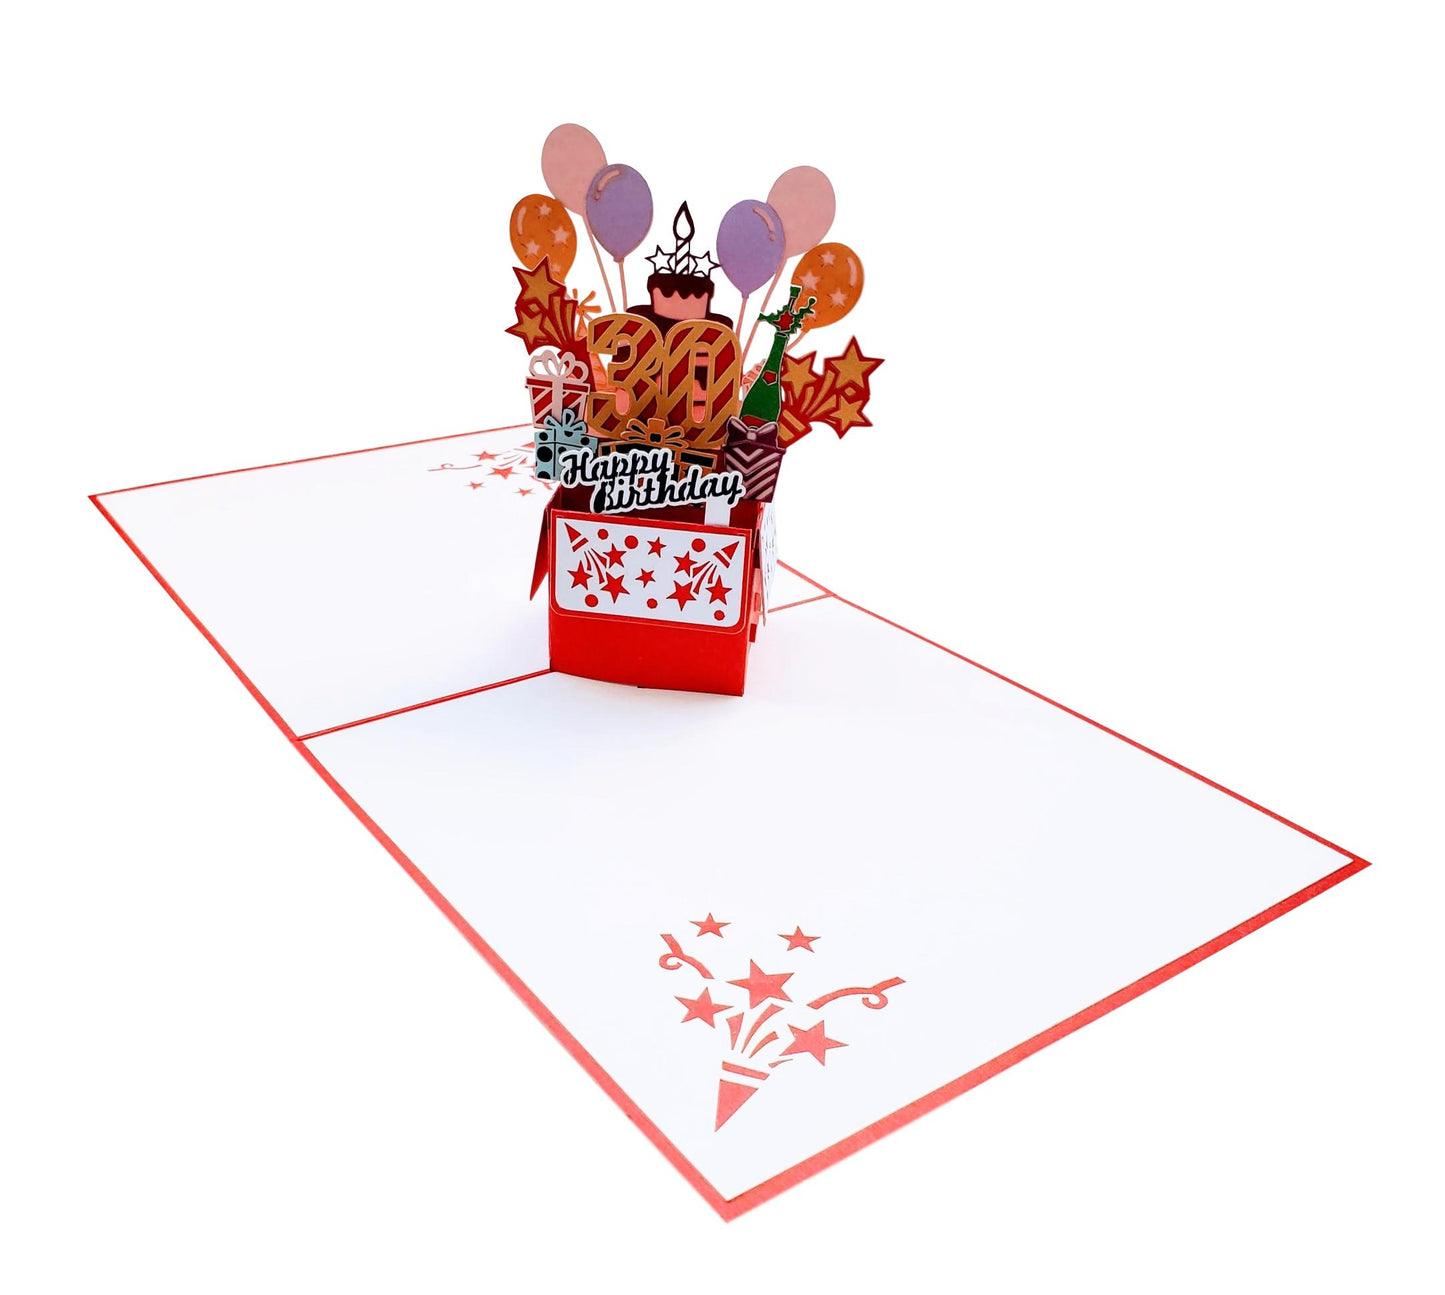 Happy 30th Birthday Red Party Box 3D Pop Up Greeting Card - Awesome - Balloons - Birthday - Congratu - iGifts And Cards